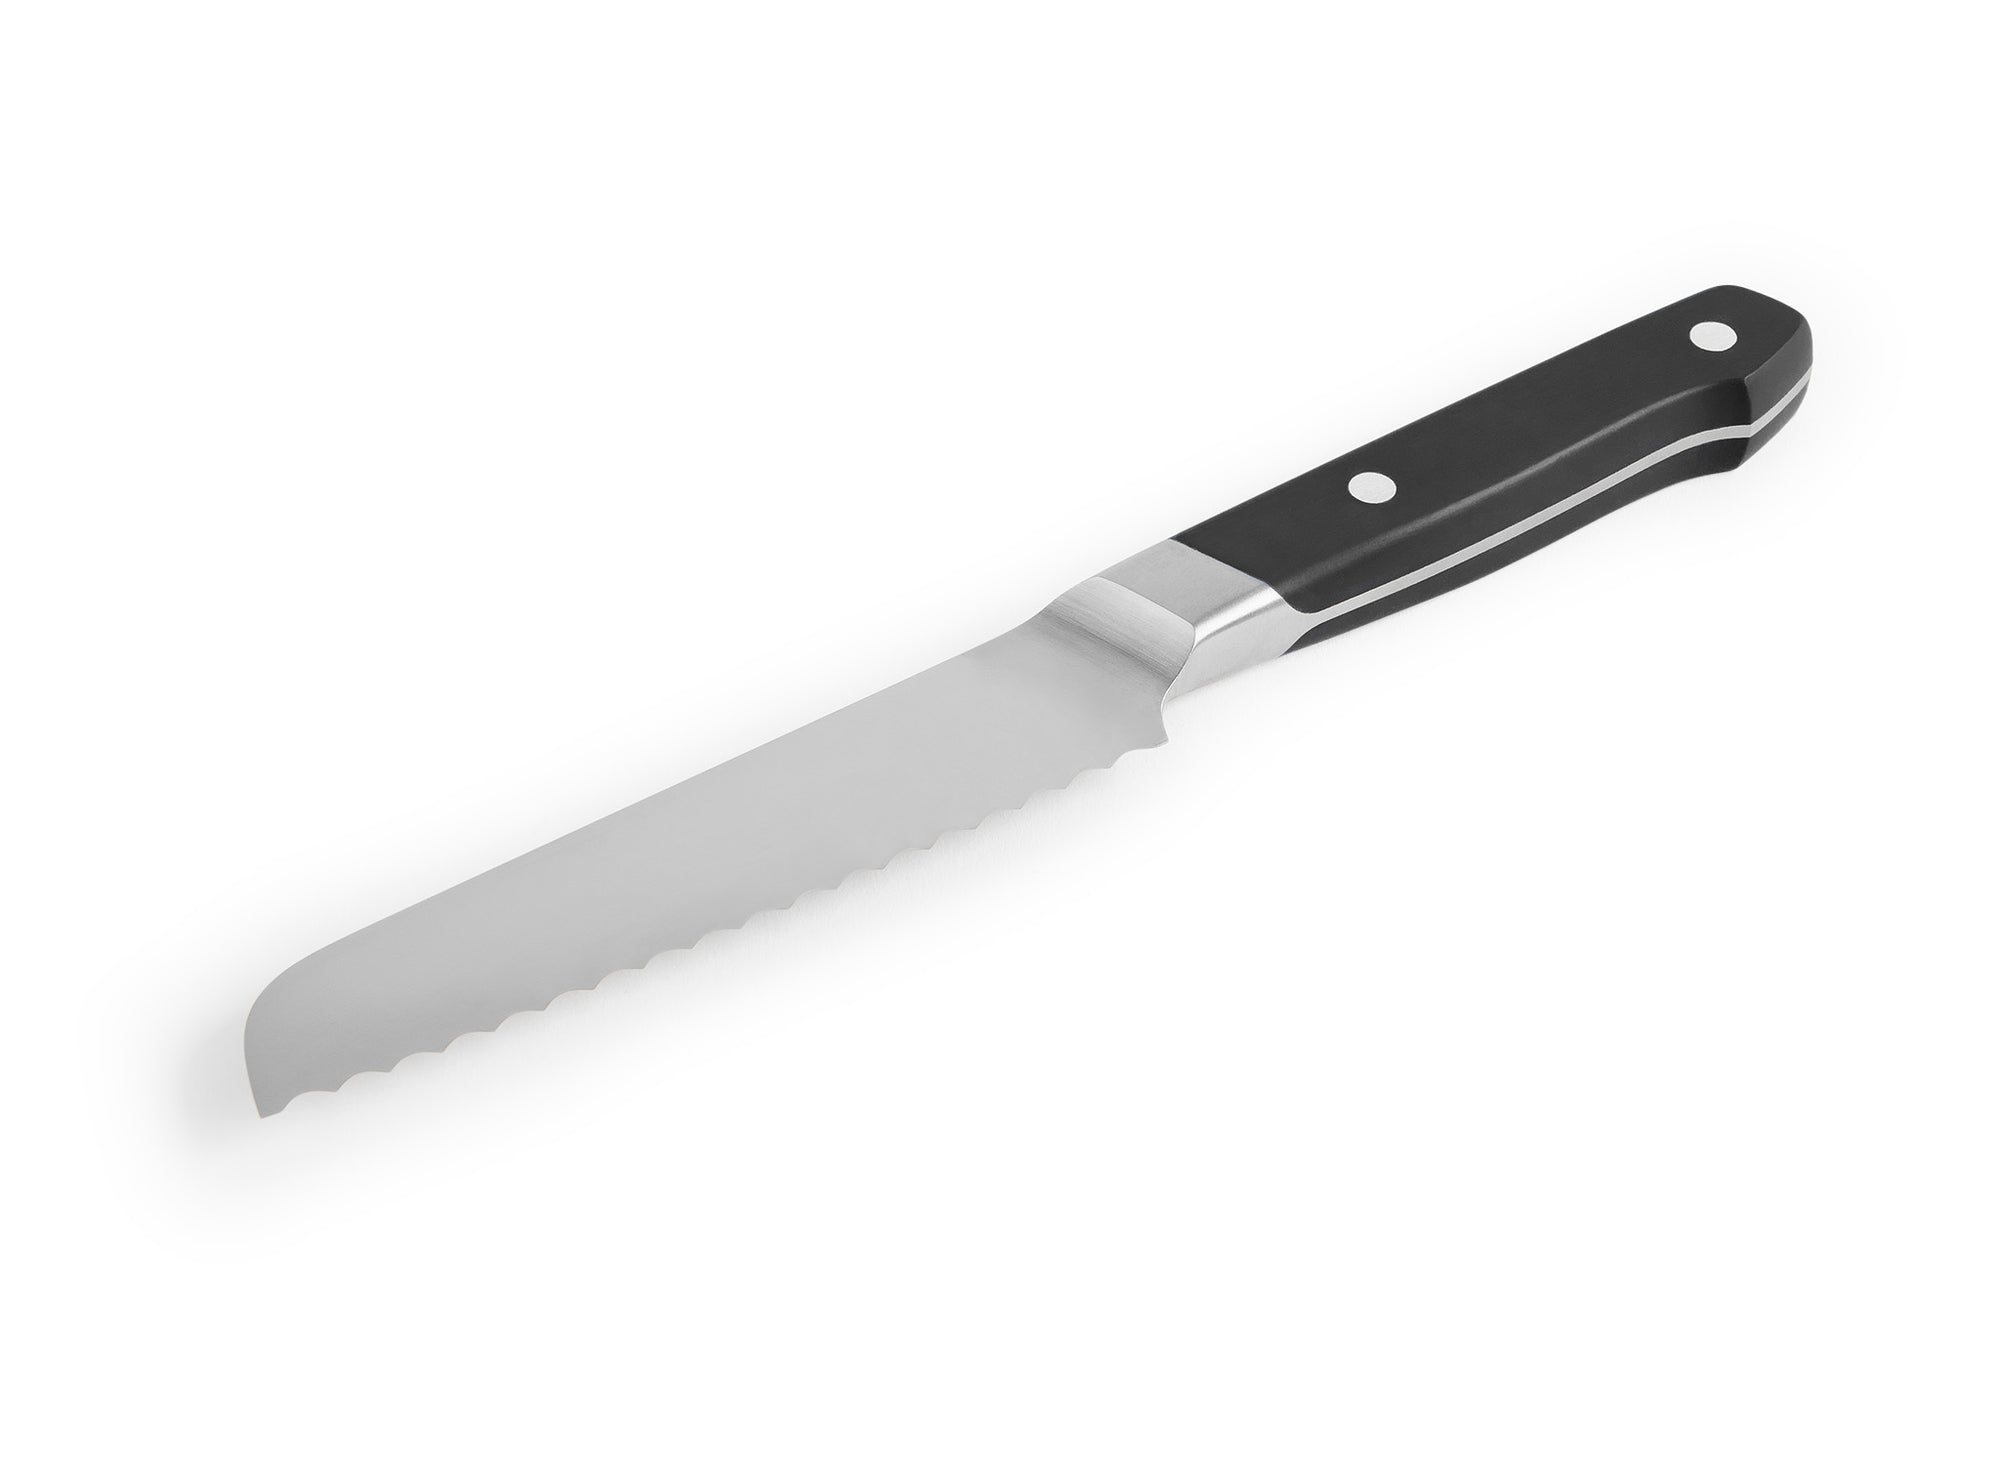 The black Misen Short Serrated Knife on a white background, with the blade pointing downward.